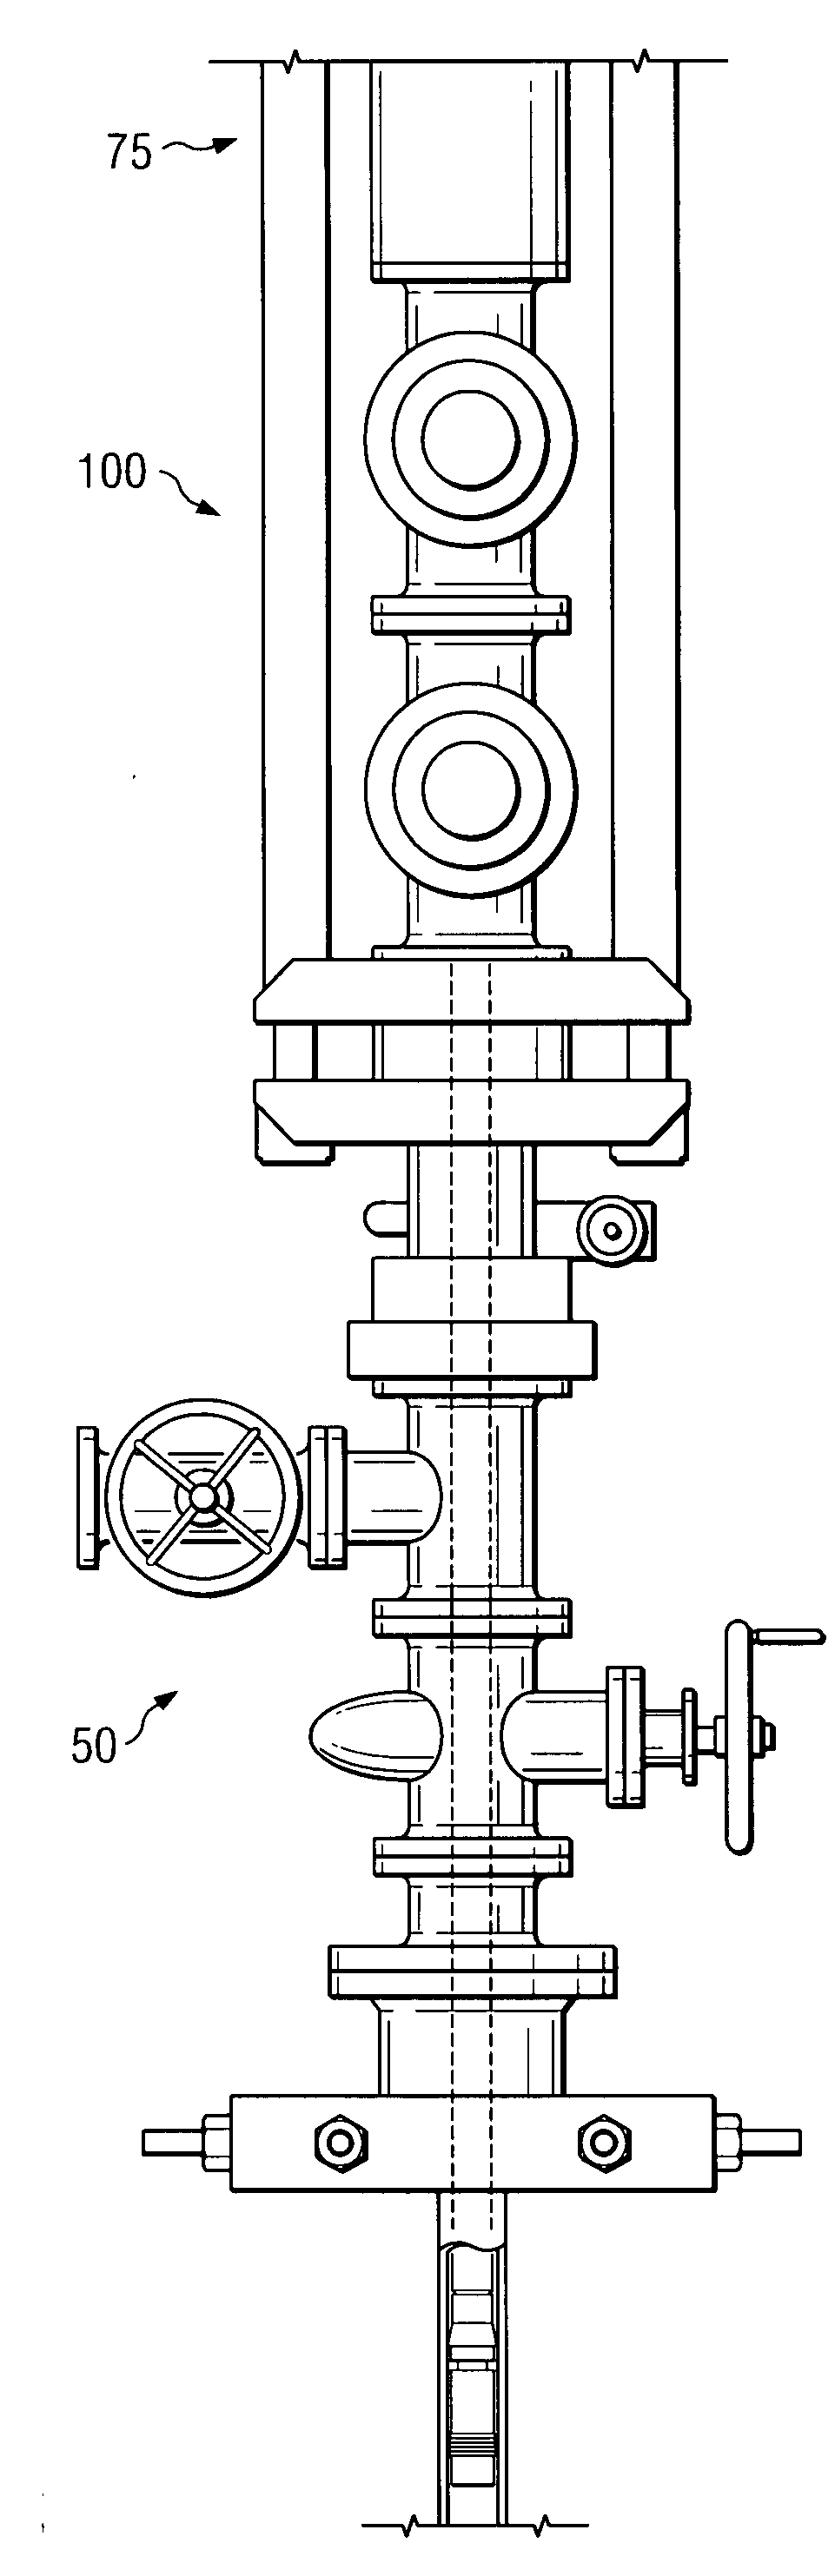 Wellhead isolation tool including an abrasive cleaning ring